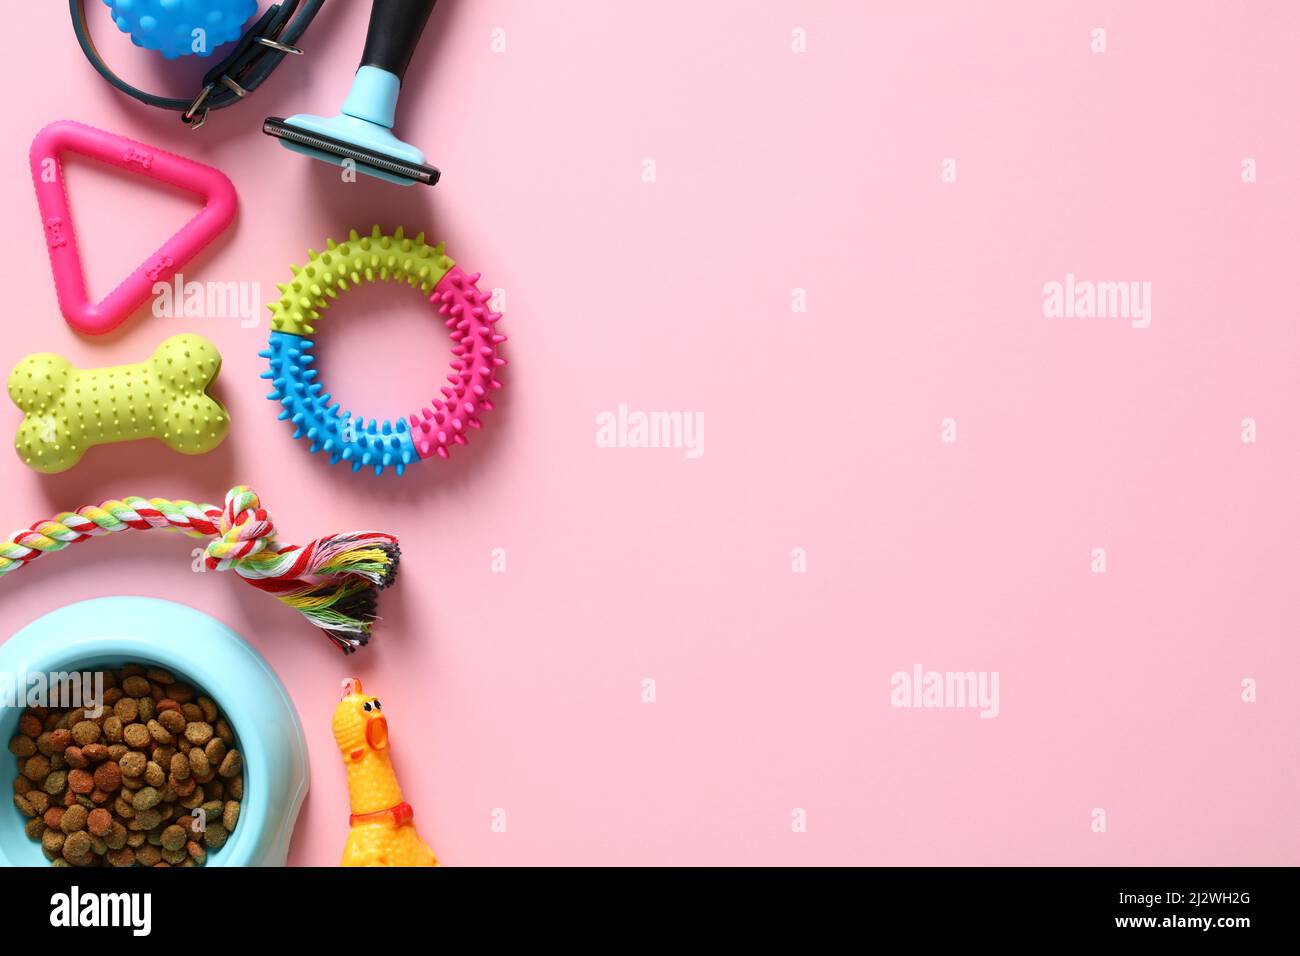 Pet store banner template. Flat lay pet accessories and toys on pink background. Top view with copy space. Stock Photo